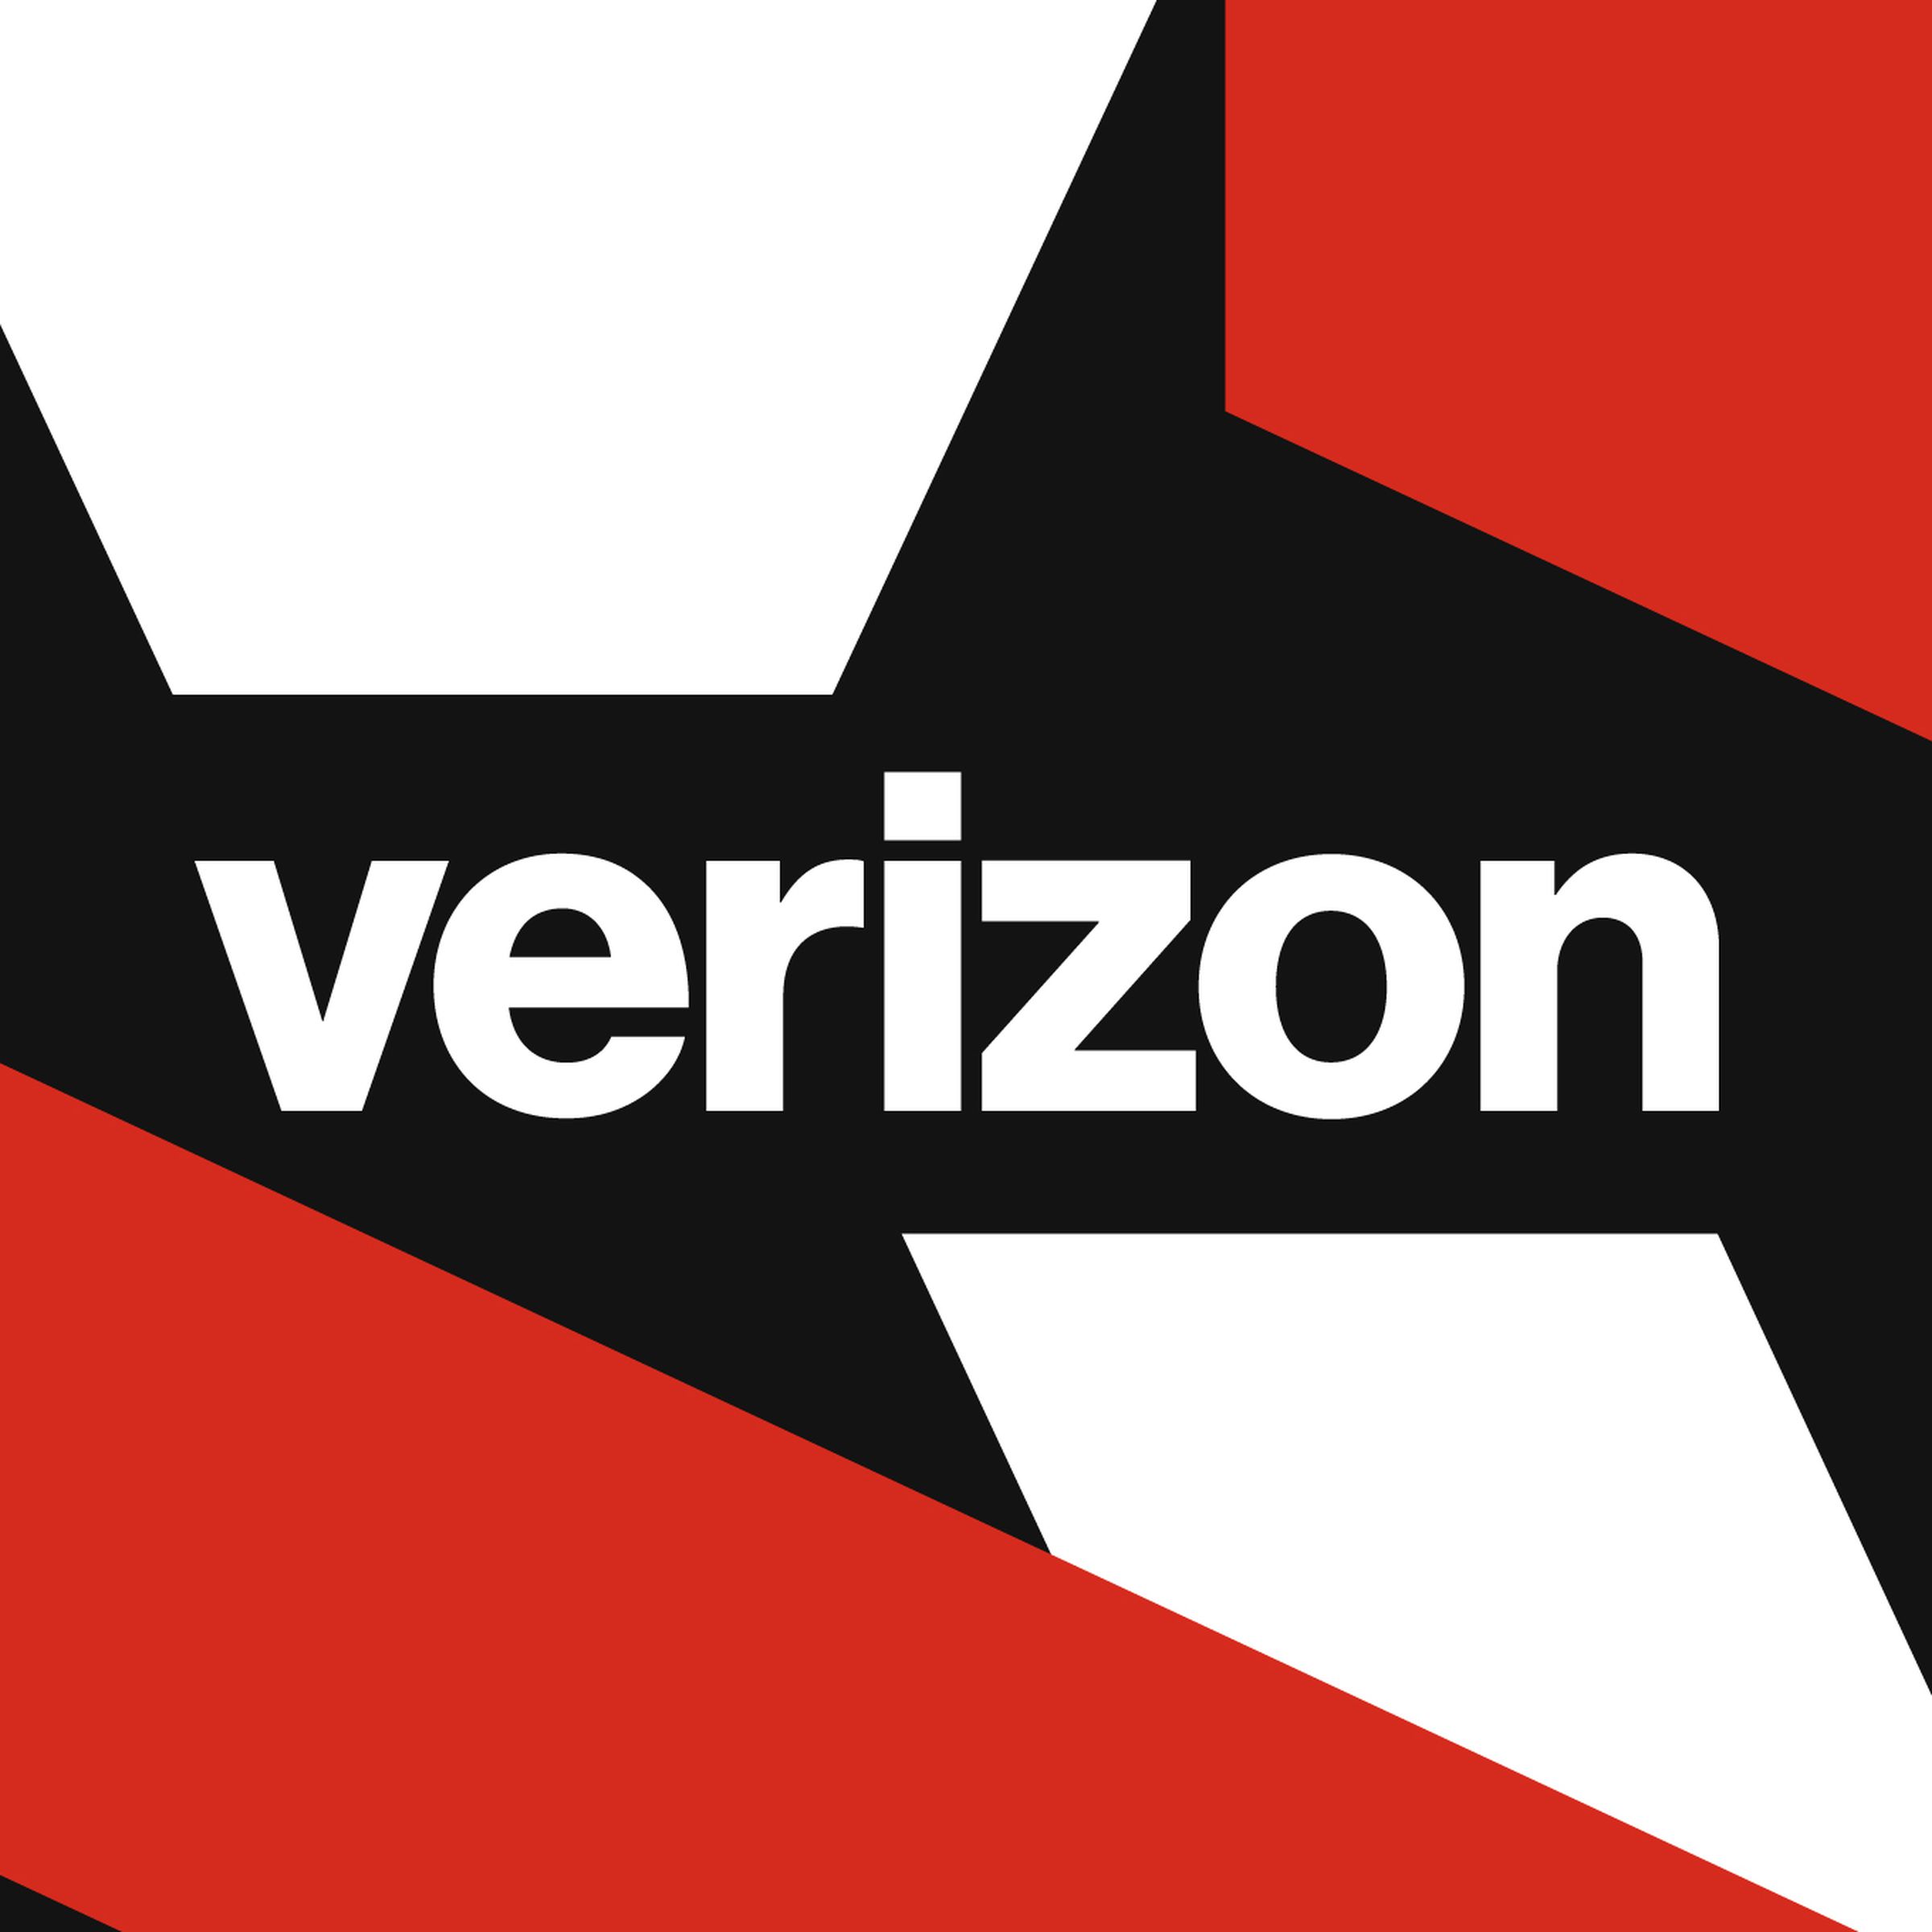 Verizon logo with red and white illustration.